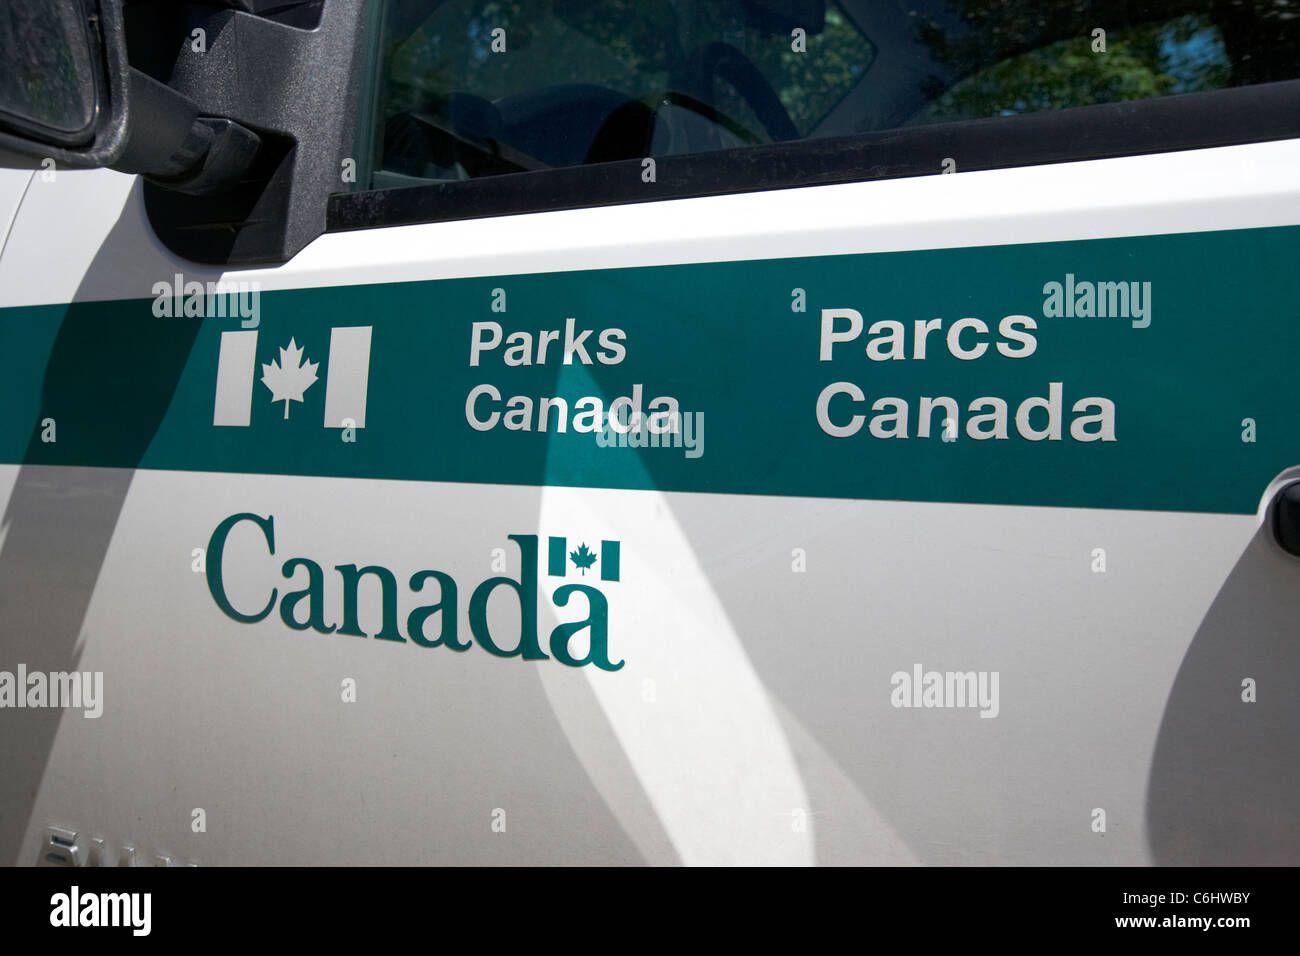 logo of parks canada on the side of a vehicle winnipeg manitoba canada Stock Photo